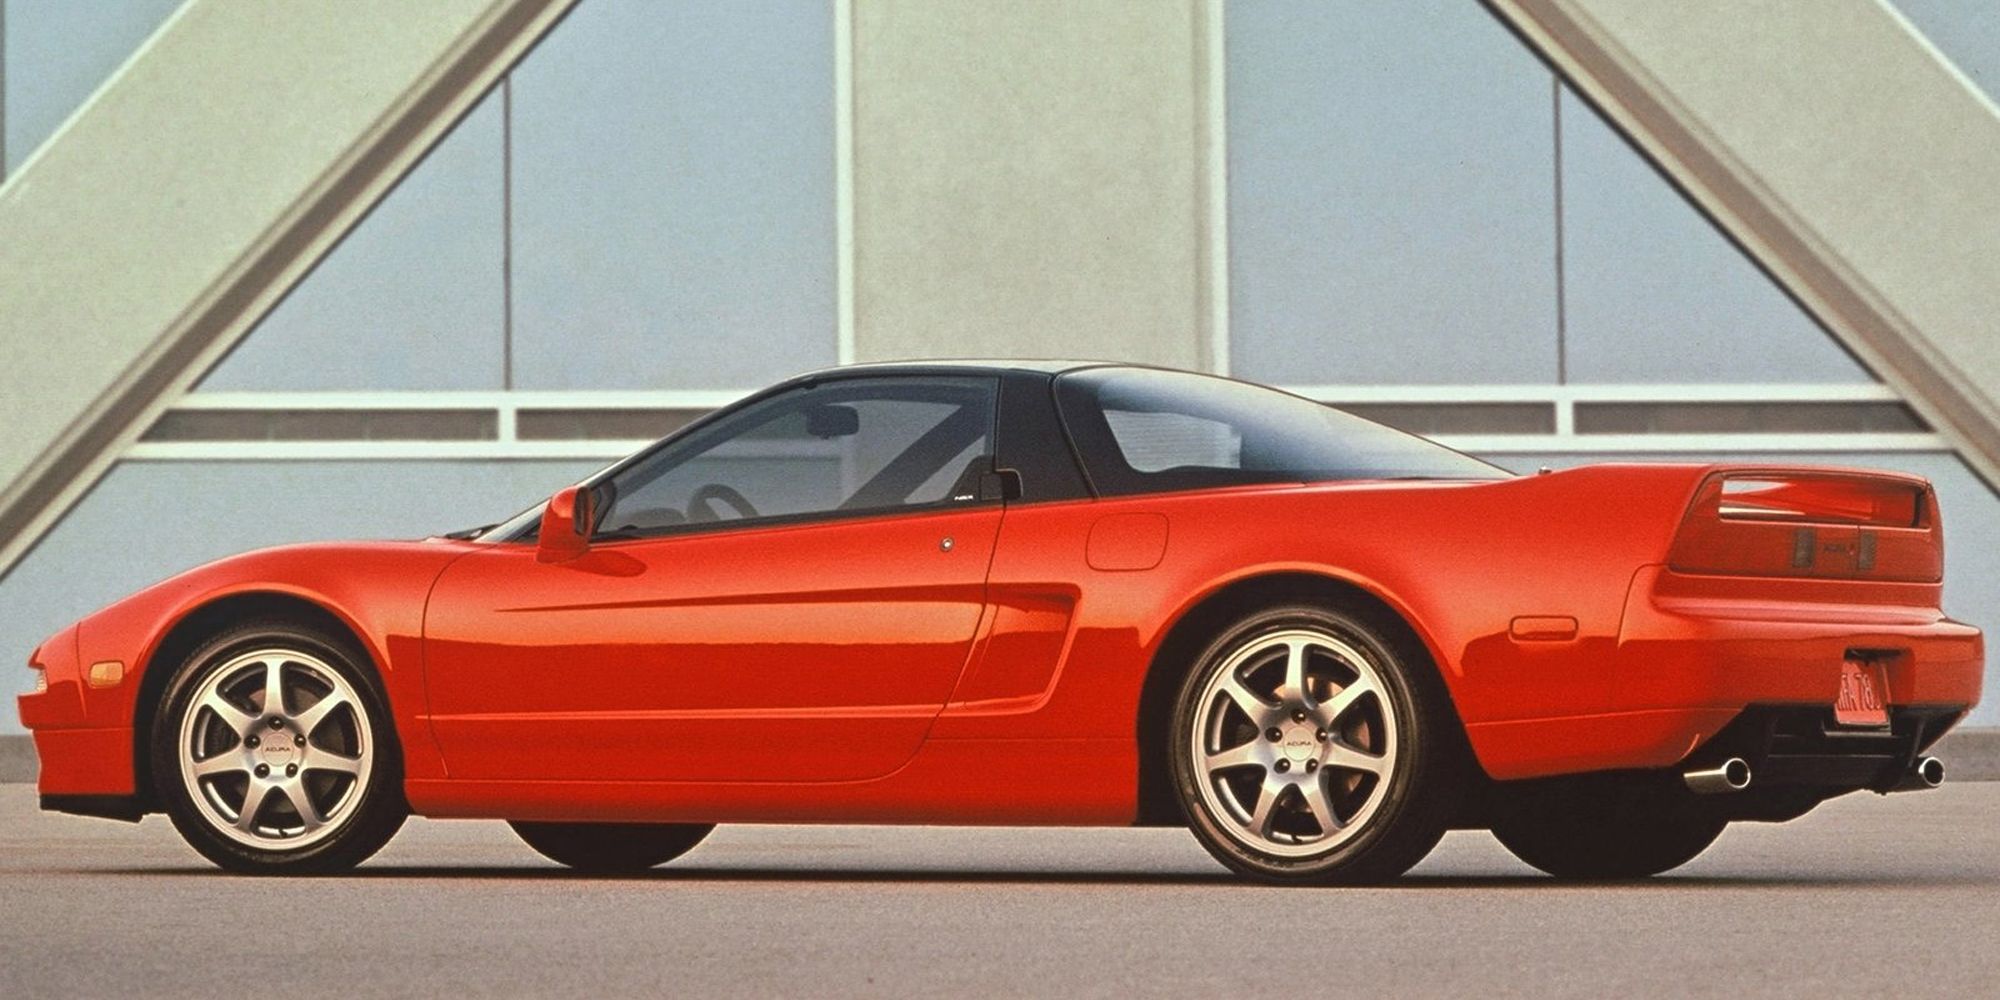 Rear 3/4 view of a red NSX